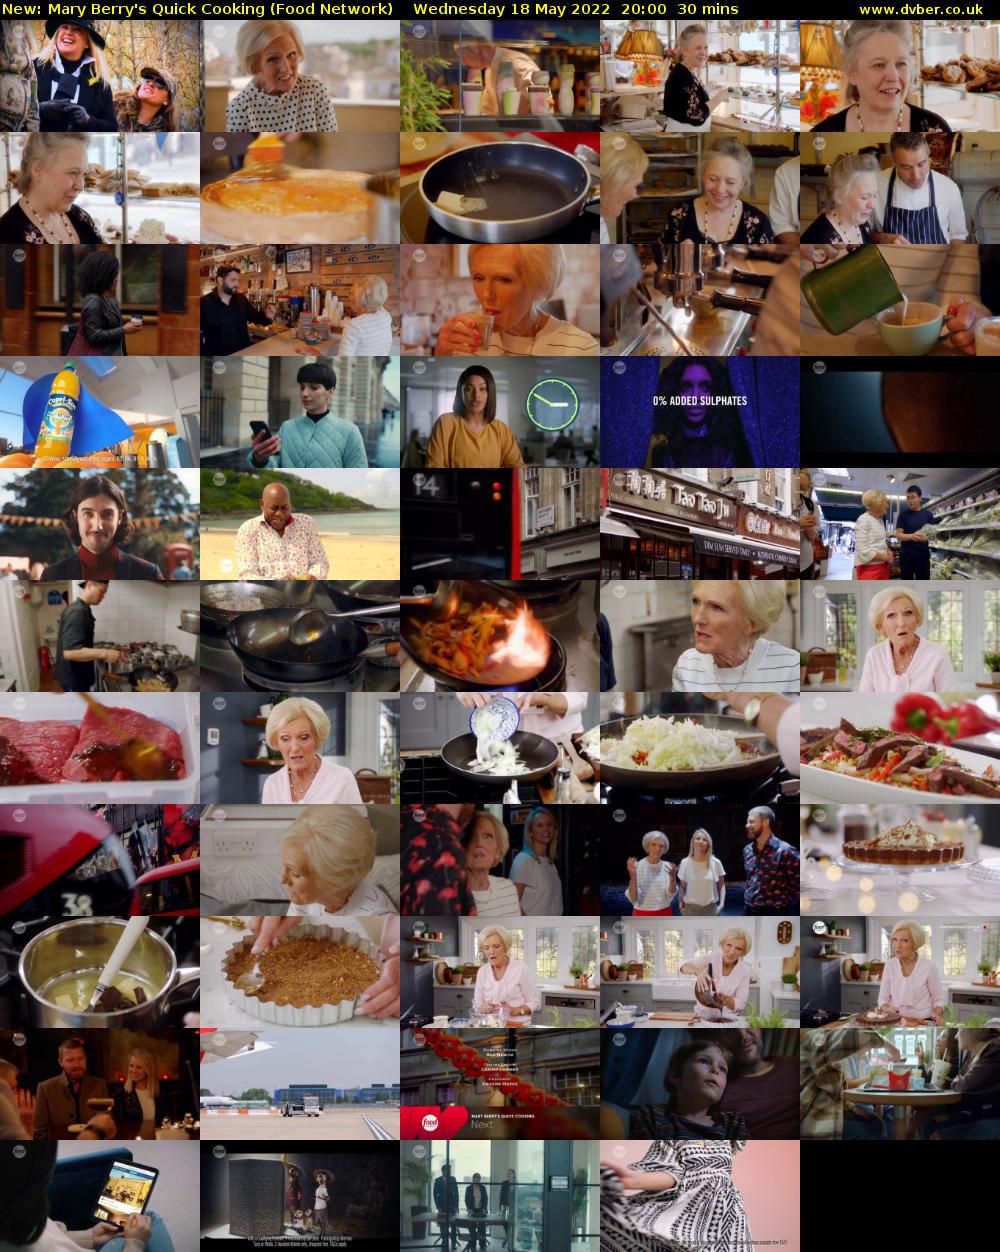 Mary Berry's Quick Cooking (Food Network) Wednesday 18 May 2022 20:00 - 20:30